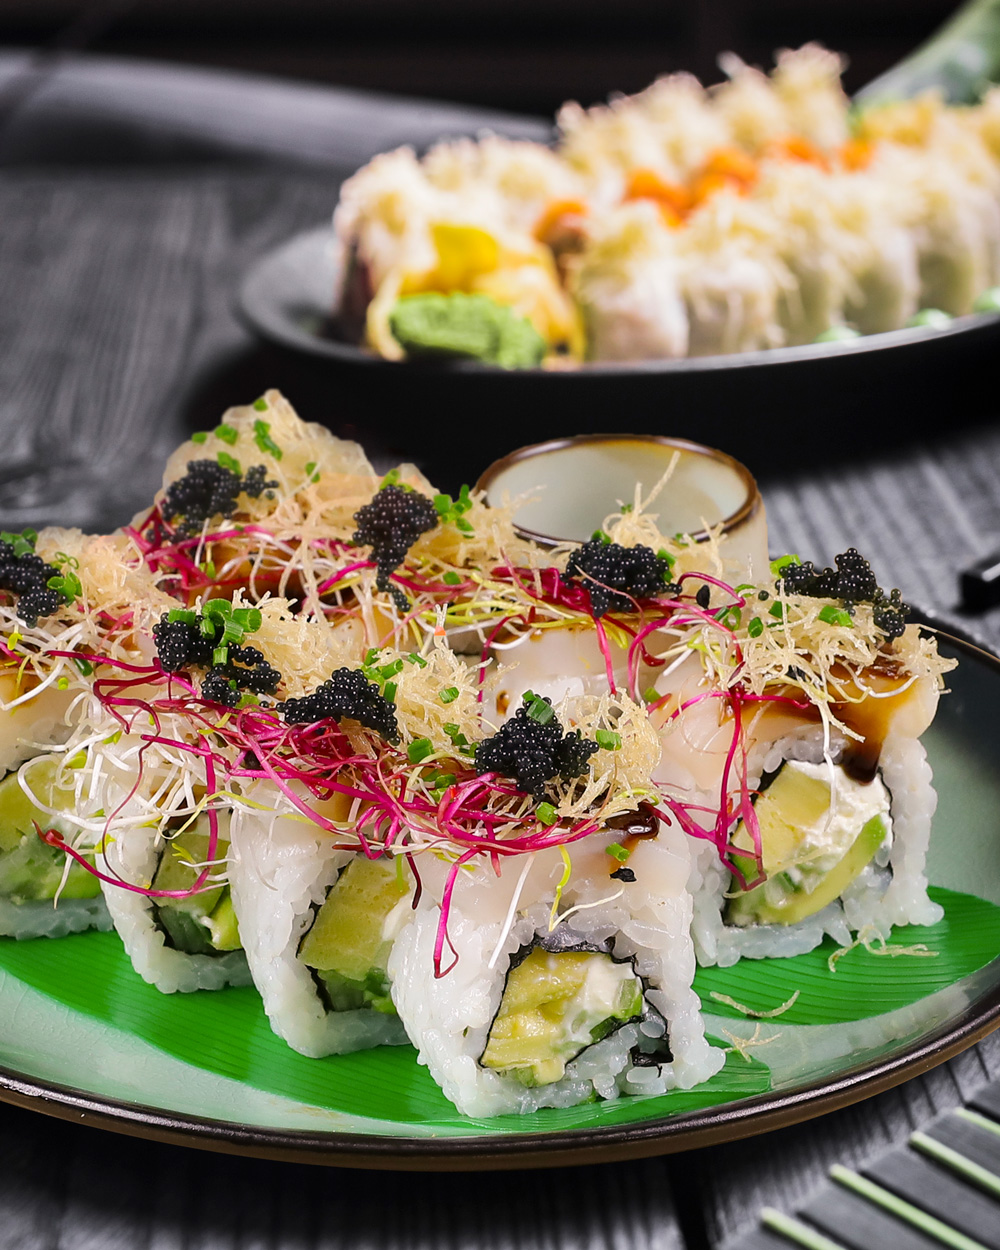 mesi-sushi-eindhoven-all-you-can-eat-afhaal-7